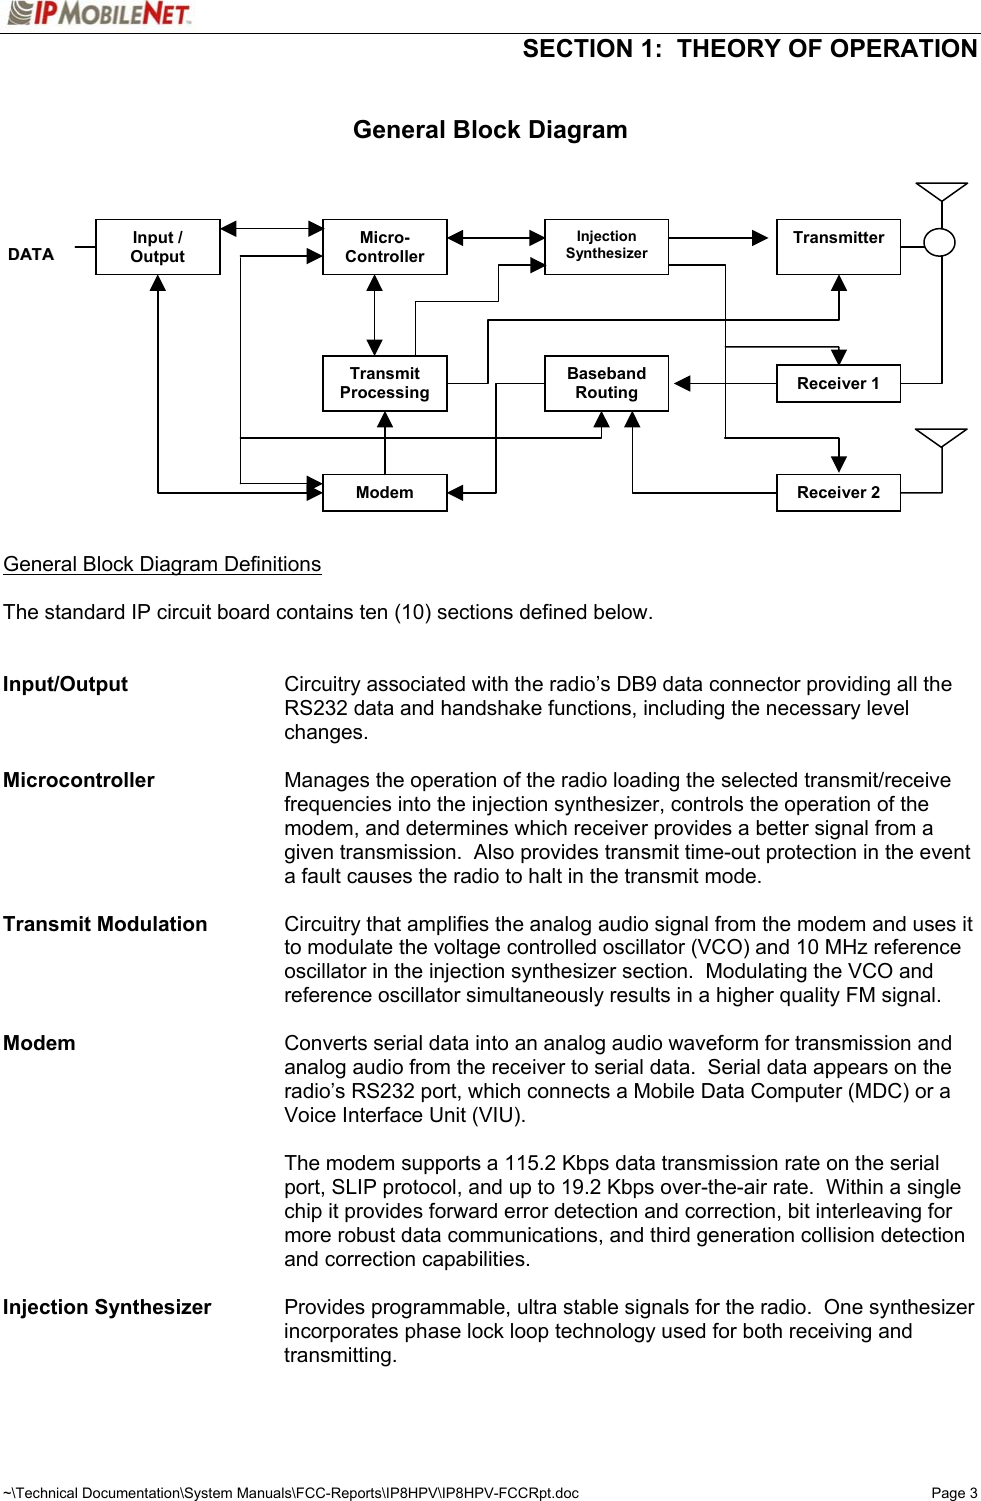   SECTION 1:  THEORY OF OPERATION  ~\Technical Documentation\System Manuals\FCC-Reports\IP8HPV\IP8HPV-FCCRpt.doc  Page 3  General Block Diagram                  General Block Diagram Definitions  The standard IP circuit board contains ten (10) sections defined below.     Input/Output  Circuitry associated with the radio’s DB9 data connector providing all the RS232 data and handshake functions, including the necessary level changes.   Microcontroller  Manages the operation of the radio loading the selected transmit/receive frequencies into the injection synthesizer, controls the operation of the modem, and determines which receiver provides a better signal from a given transmission.  Also provides transmit time-out protection in the event a fault causes the radio to halt in the transmit mode.  Transmit Modulation  Circuitry that amplifies the analog audio signal from the modem and uses it to modulate the voltage controlled oscillator (VCO) and 10 MHz reference oscillator in the injection synthesizer section.  Modulating the VCO and reference oscillator simultaneously results in a higher quality FM signal.  Modem  Converts serial data into an analog audio waveform for transmission and analog audio from the receiver to serial data.  Serial data appears on the radio’s RS232 port, which connects a Mobile Data Computer (MDC) or a Voice Interface Unit (VIU).    The modem supports a 115.2 Kbps data transmission rate on the serial port, SLIP protocol, and up to 19.2 Kbps over-the-air rate.  Within a single chip it provides forward error detection and correction, bit interleaving for more robust data communications, and third generation collision detection and correction capabilities.  Injection Synthesizer    Provides programmable, ultra stable signals for the radio.  One synthesizer incorporates phase lock loop technology used for both receiving and transmitting.  Input / Output DDAATTAA Micro- Controller Injection Synthesizer Transmitter Transmit Processing Baseband Routing Receiver 1 Receiver 2 Modem 